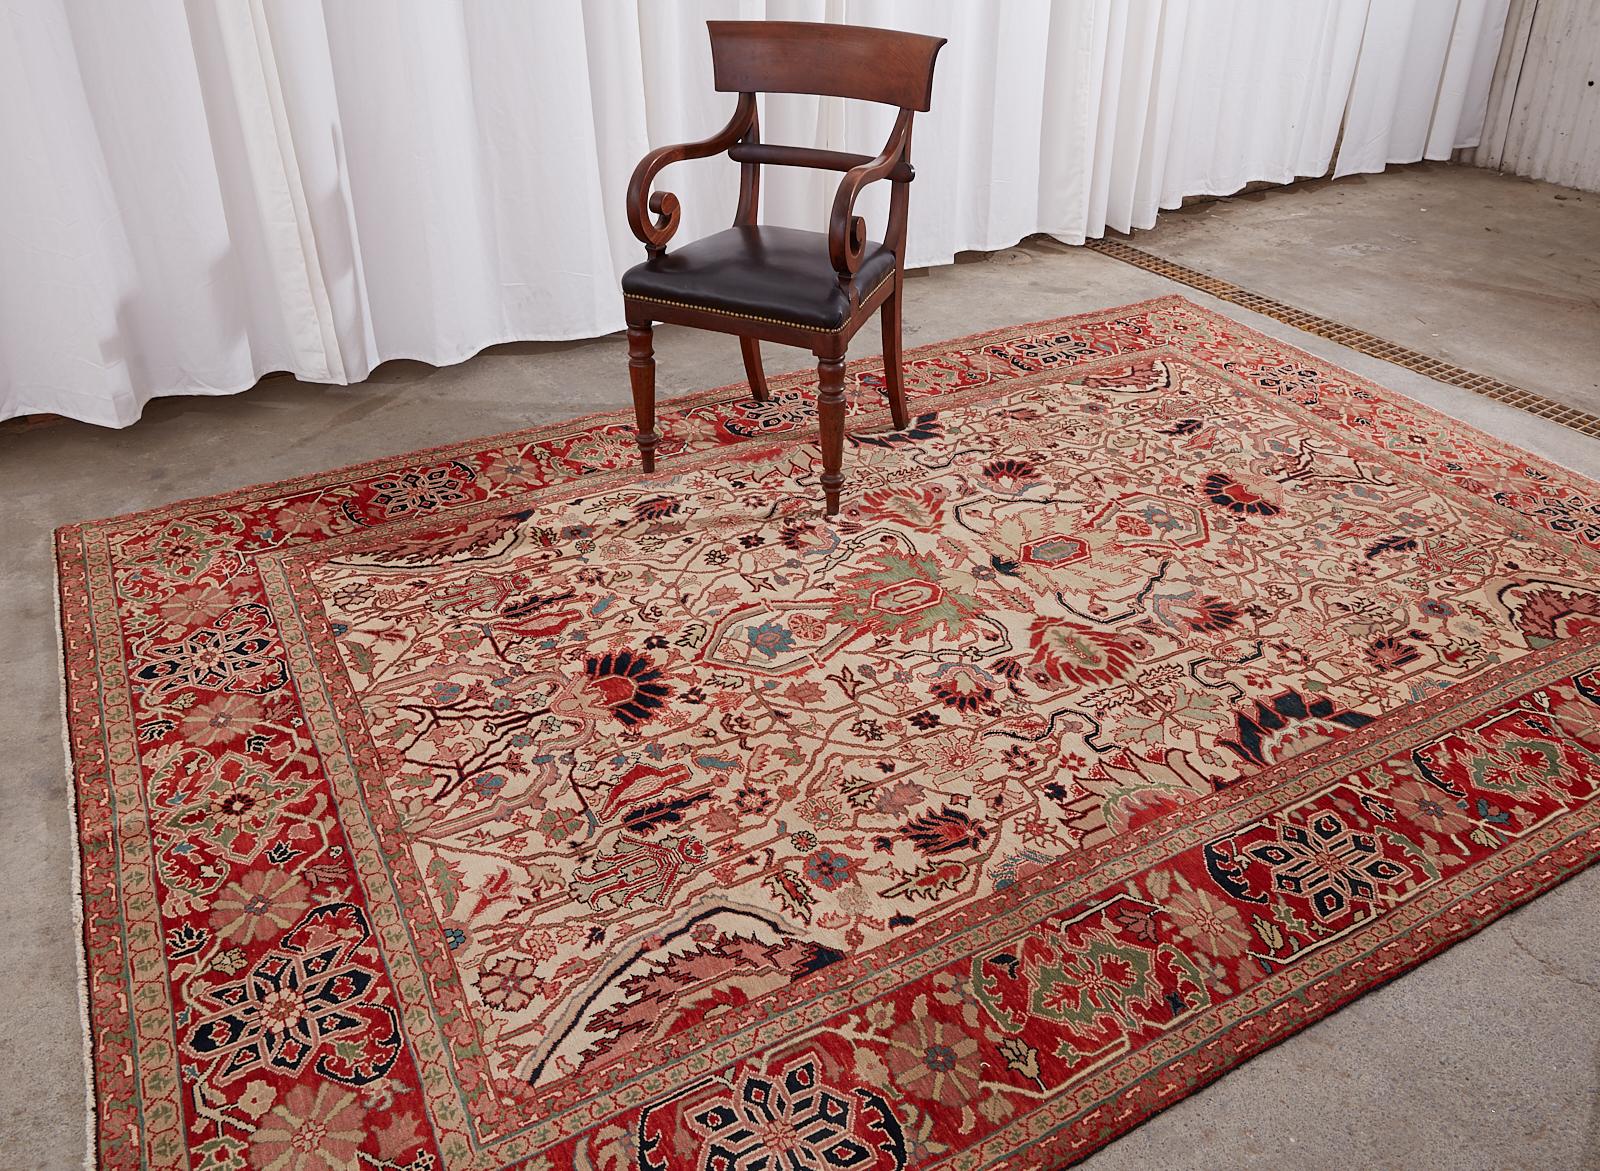 Colorful hand-knotted Turkish wool rug made in the Persian Heriz Serapi style featuring an arts and crafts design. Finely woven with intricate patterns over a cream field having moss green accents throughout, which compliment the arts and crafts